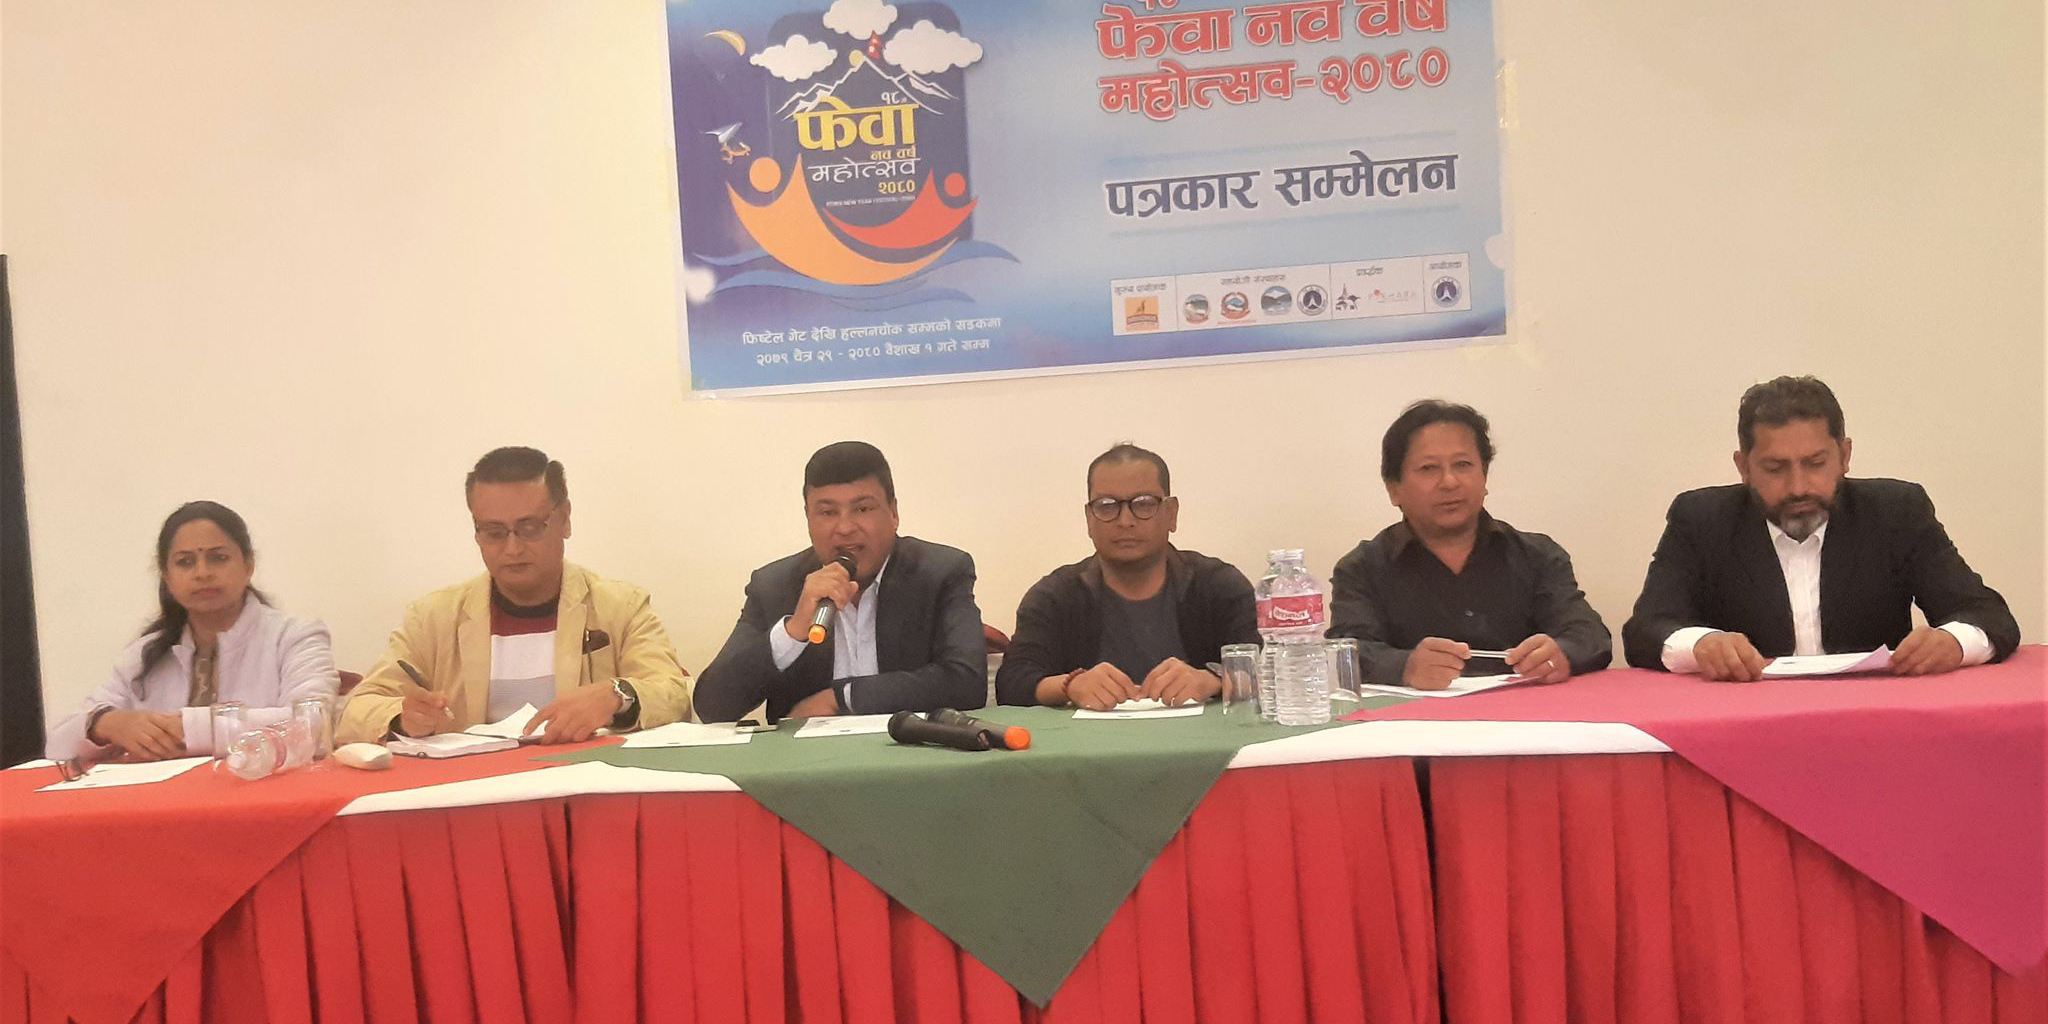 Pokhara hosting New Year festival from April 12